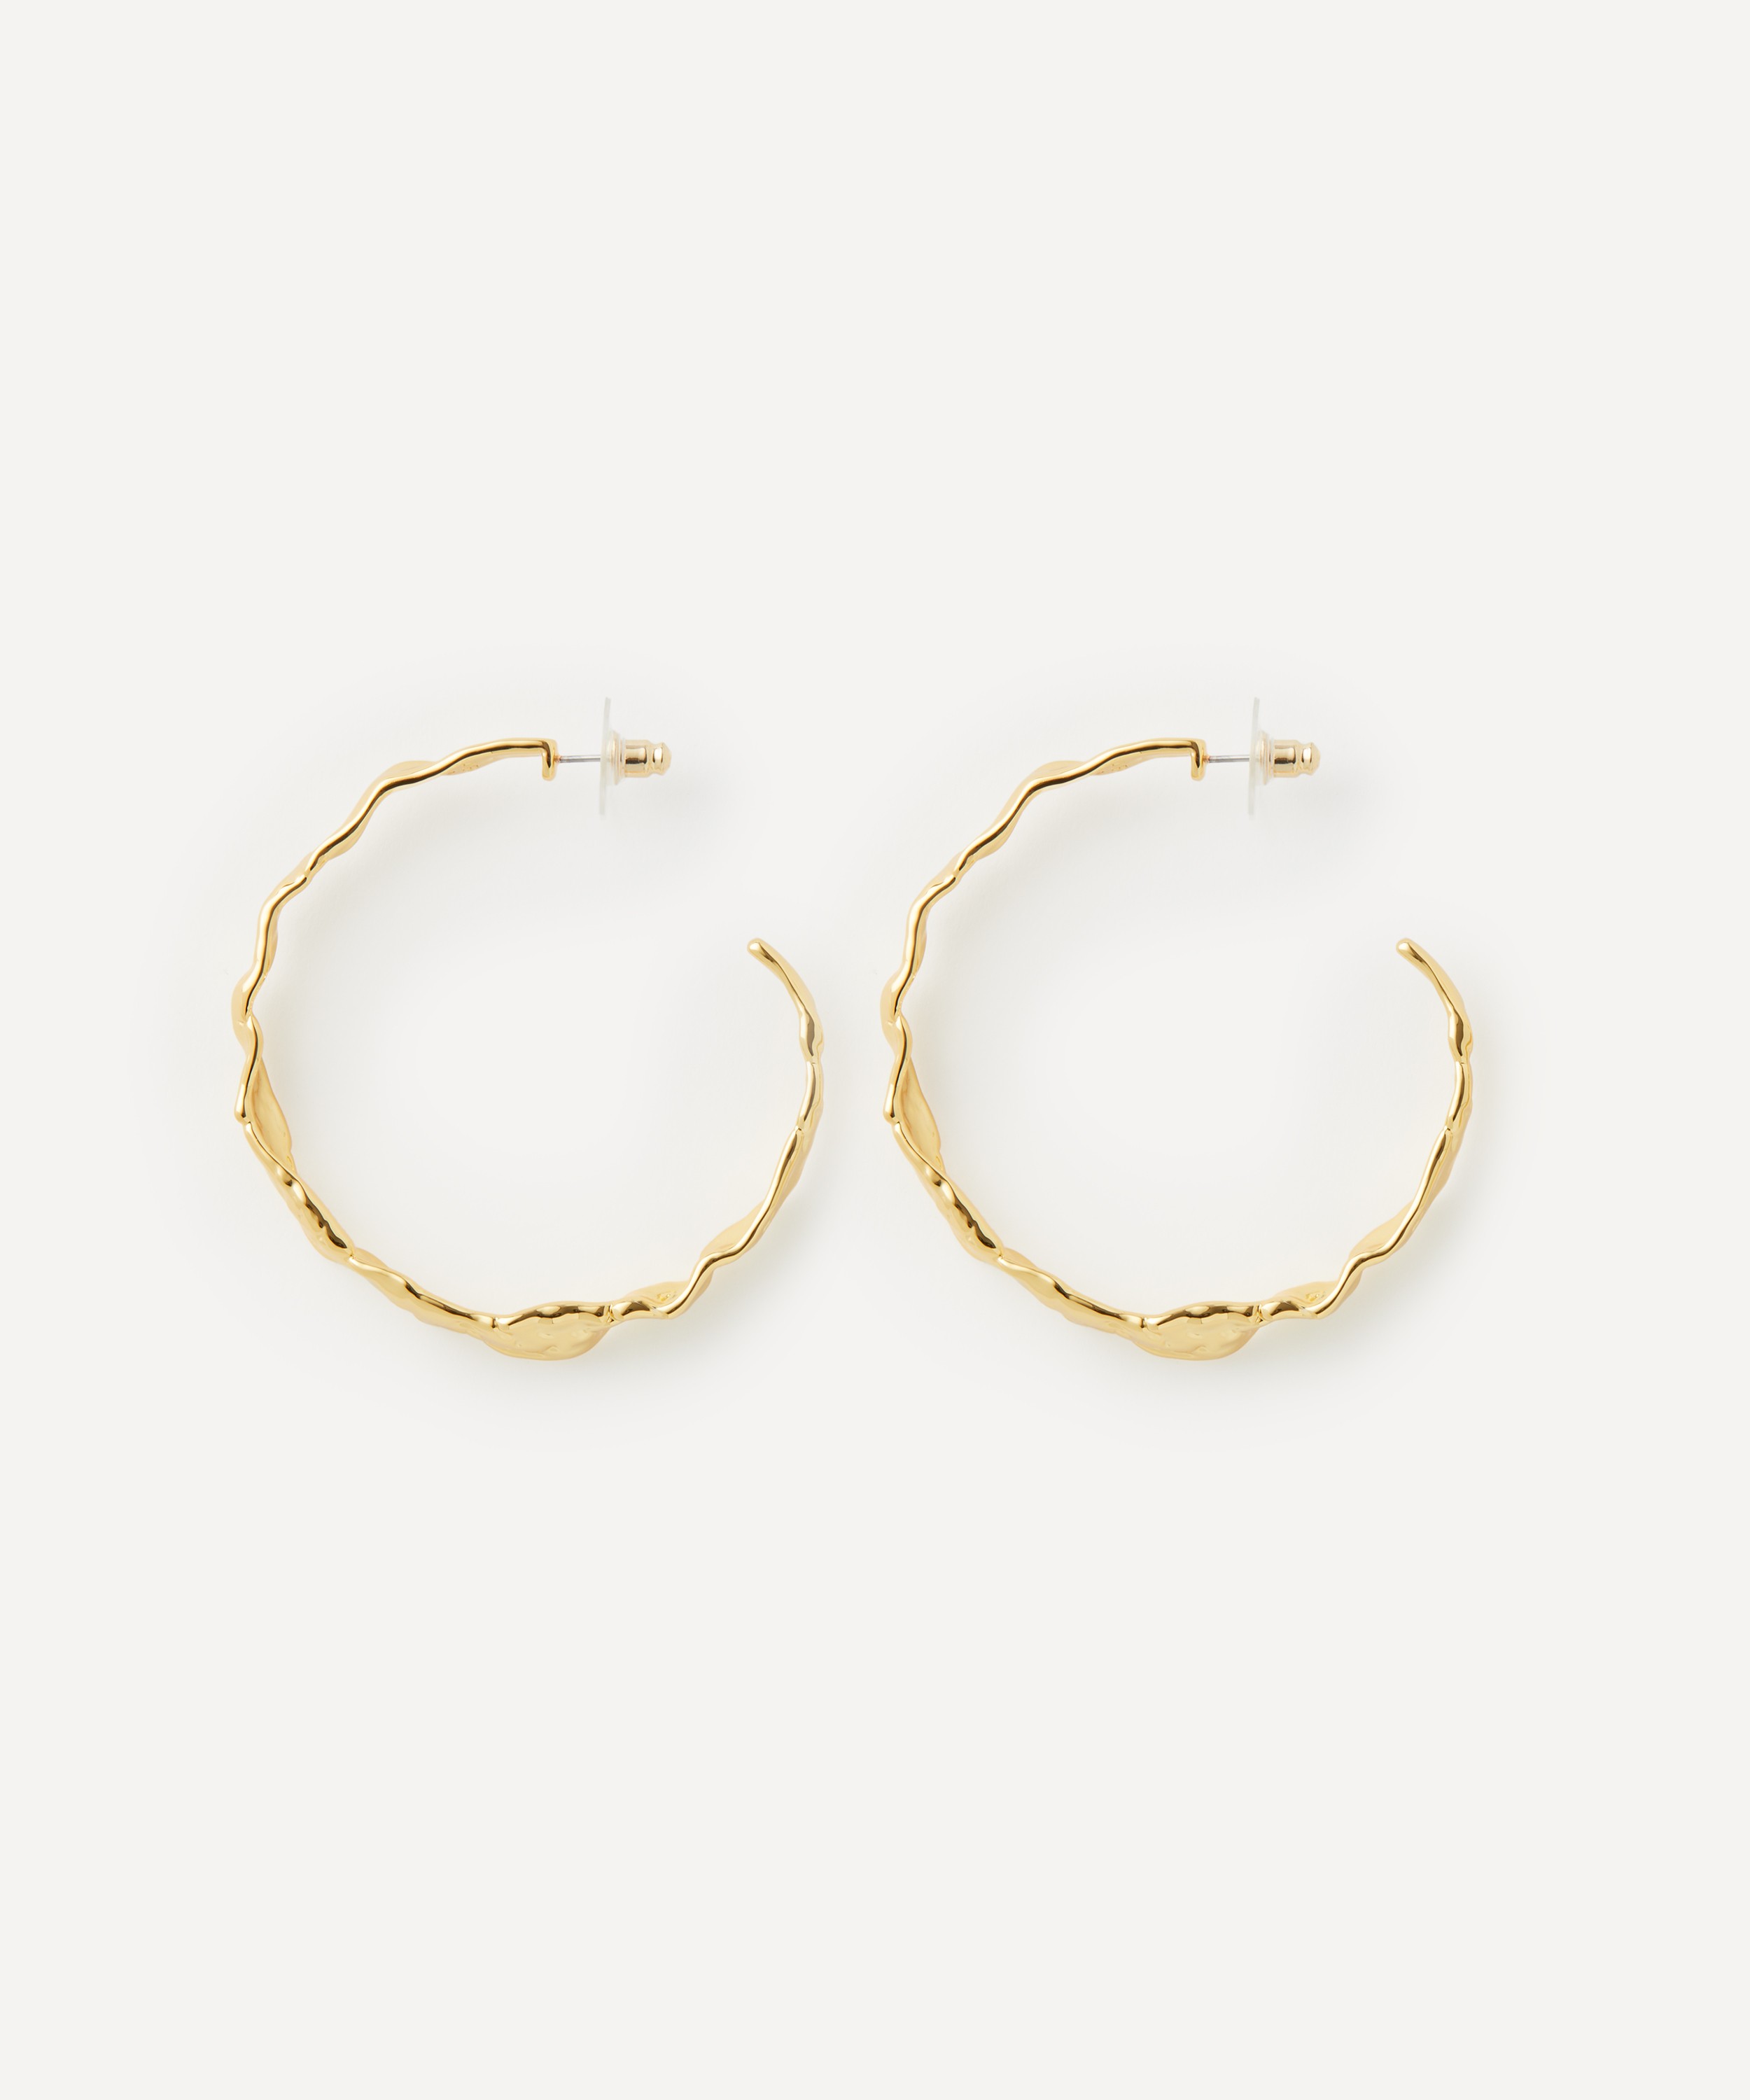 Alexis Bittar - 14ct Gold-Plated Brut Textured Hoop Earrings image number 2